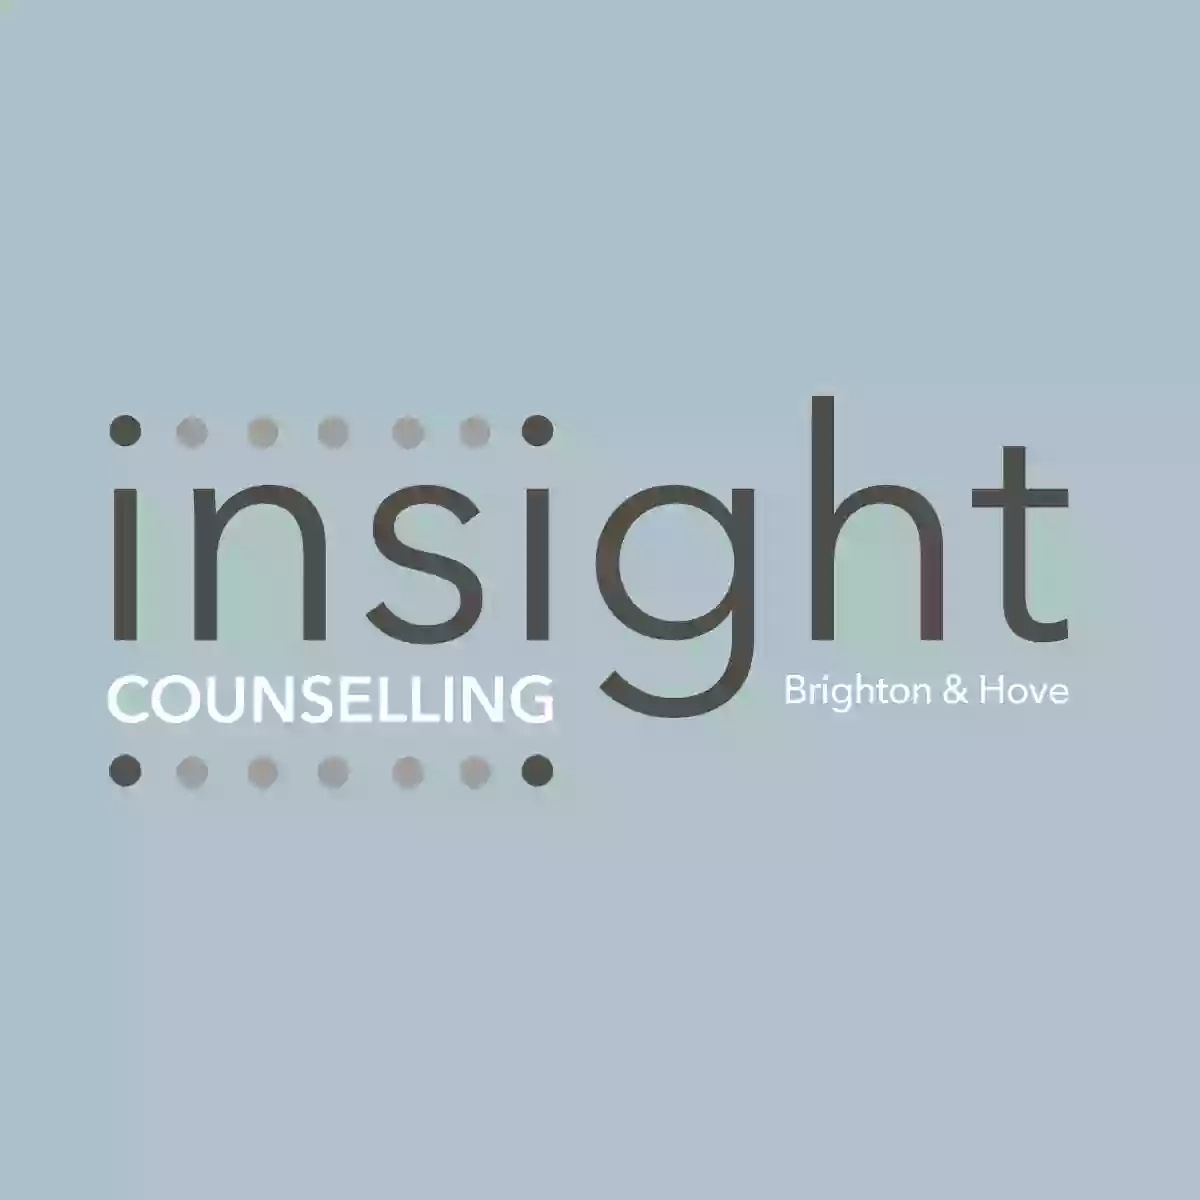 Insight Counselling Brighton & Hove